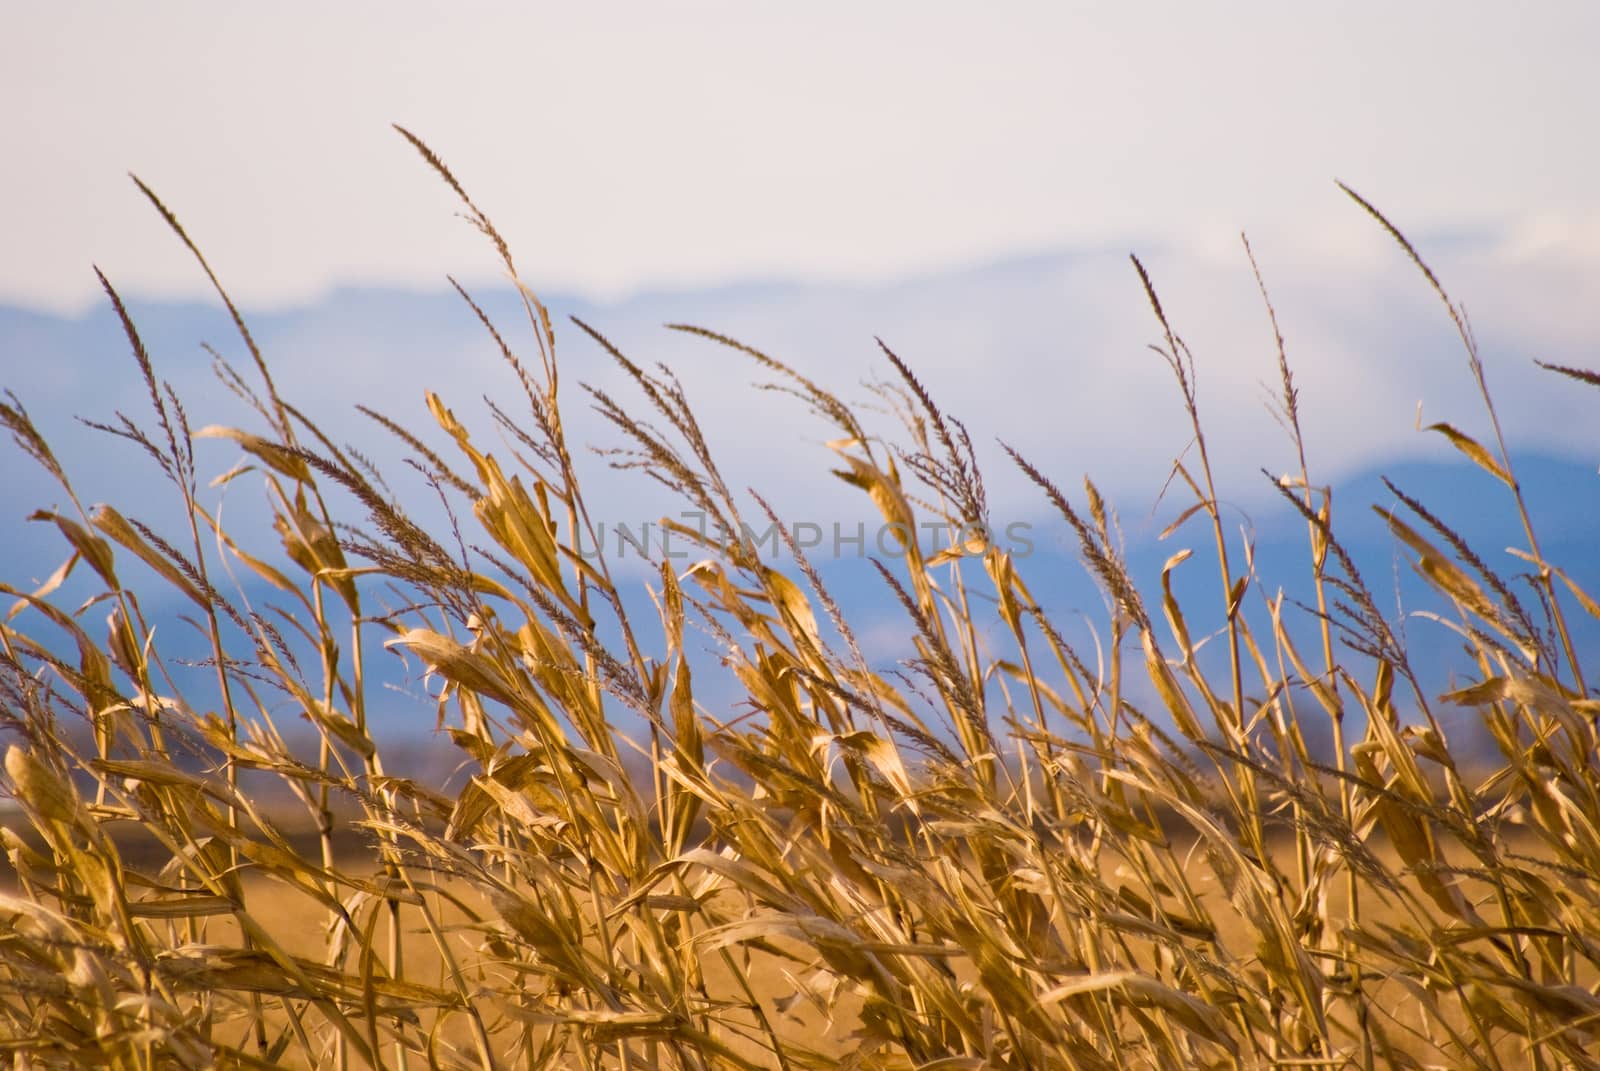 Focus on foreground (cornstalks) with cloudy mountains blurred in the back